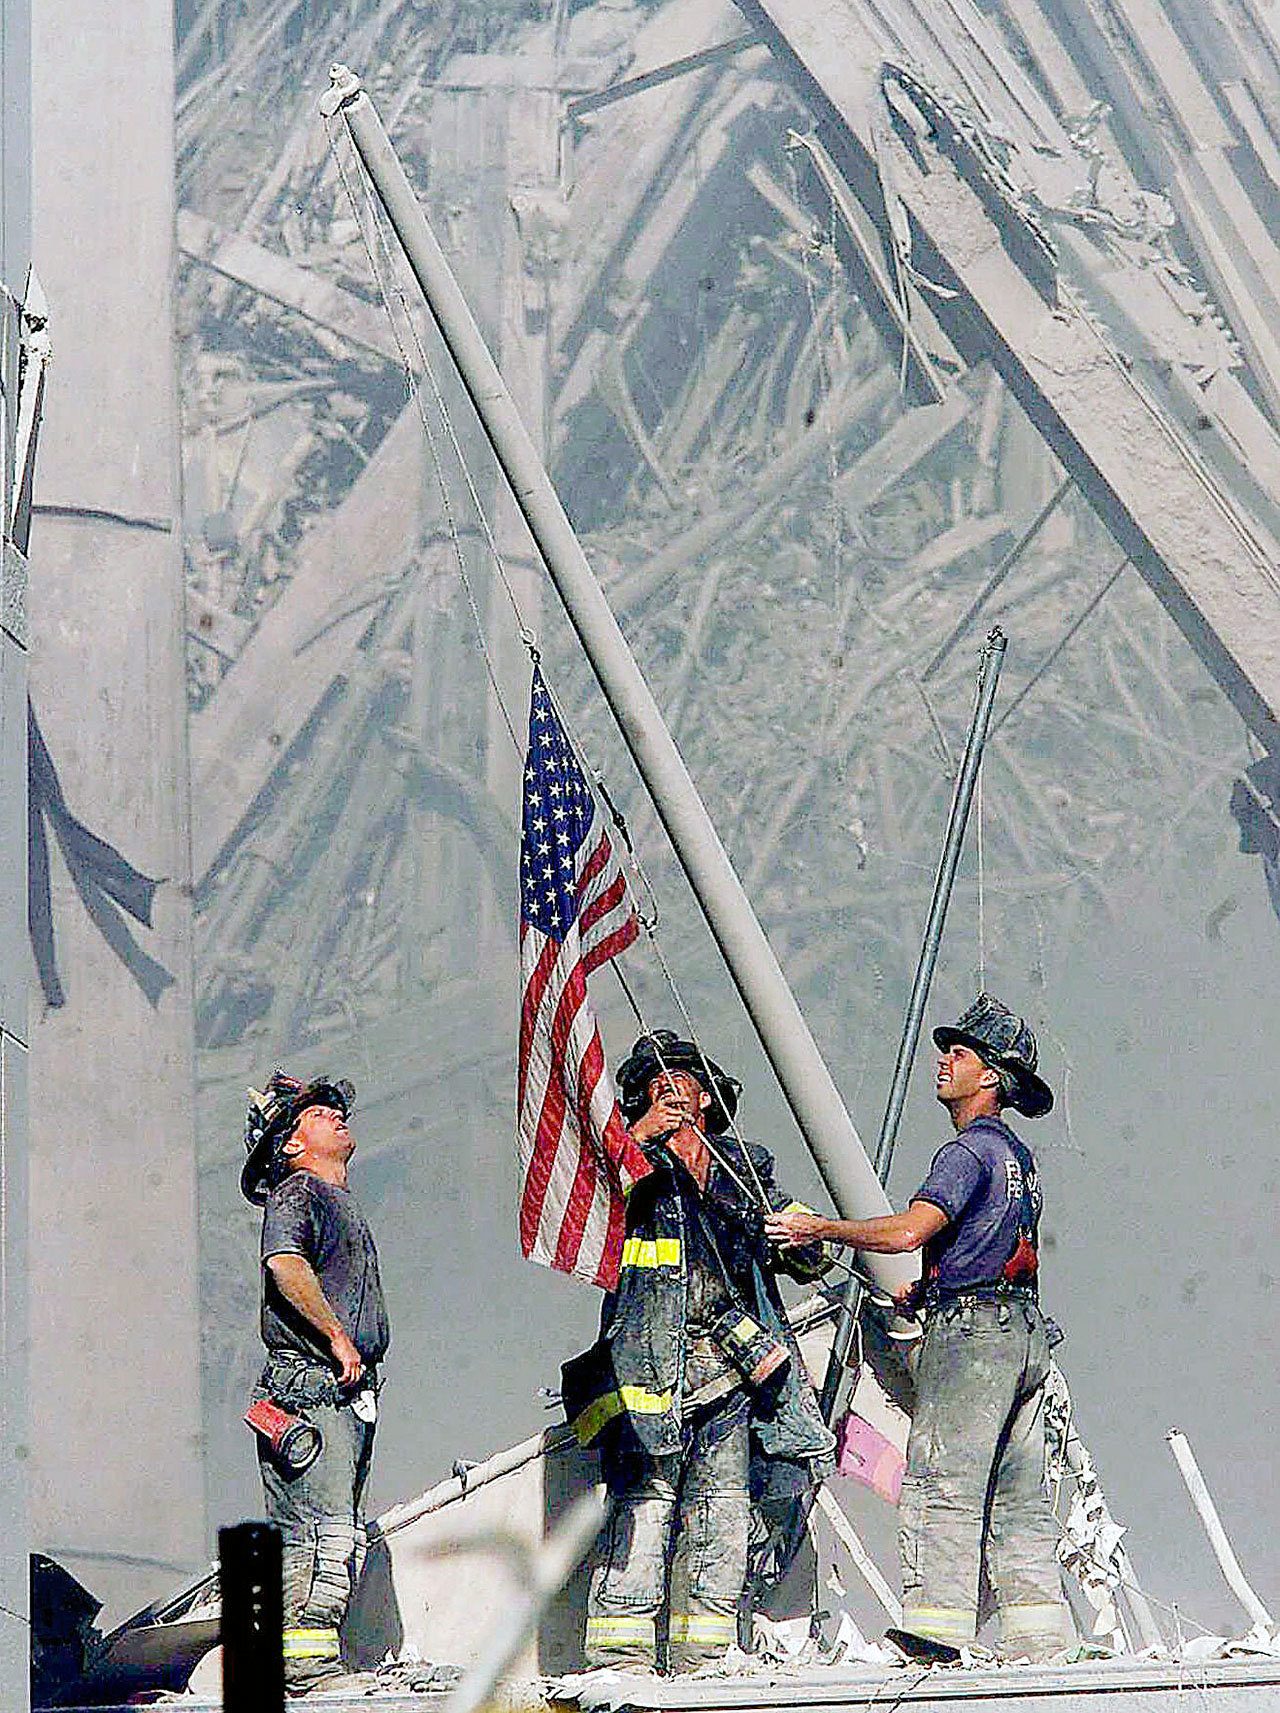 Brooklyn firefighters raise a flag at the site of the World Trade Center in New York on Sept. 11, 2001. The flag turned up in 2014 in Everett under mysterious circumstances. (Thomas E. Franklin/The Record of Bergen County, N.J., via AP)